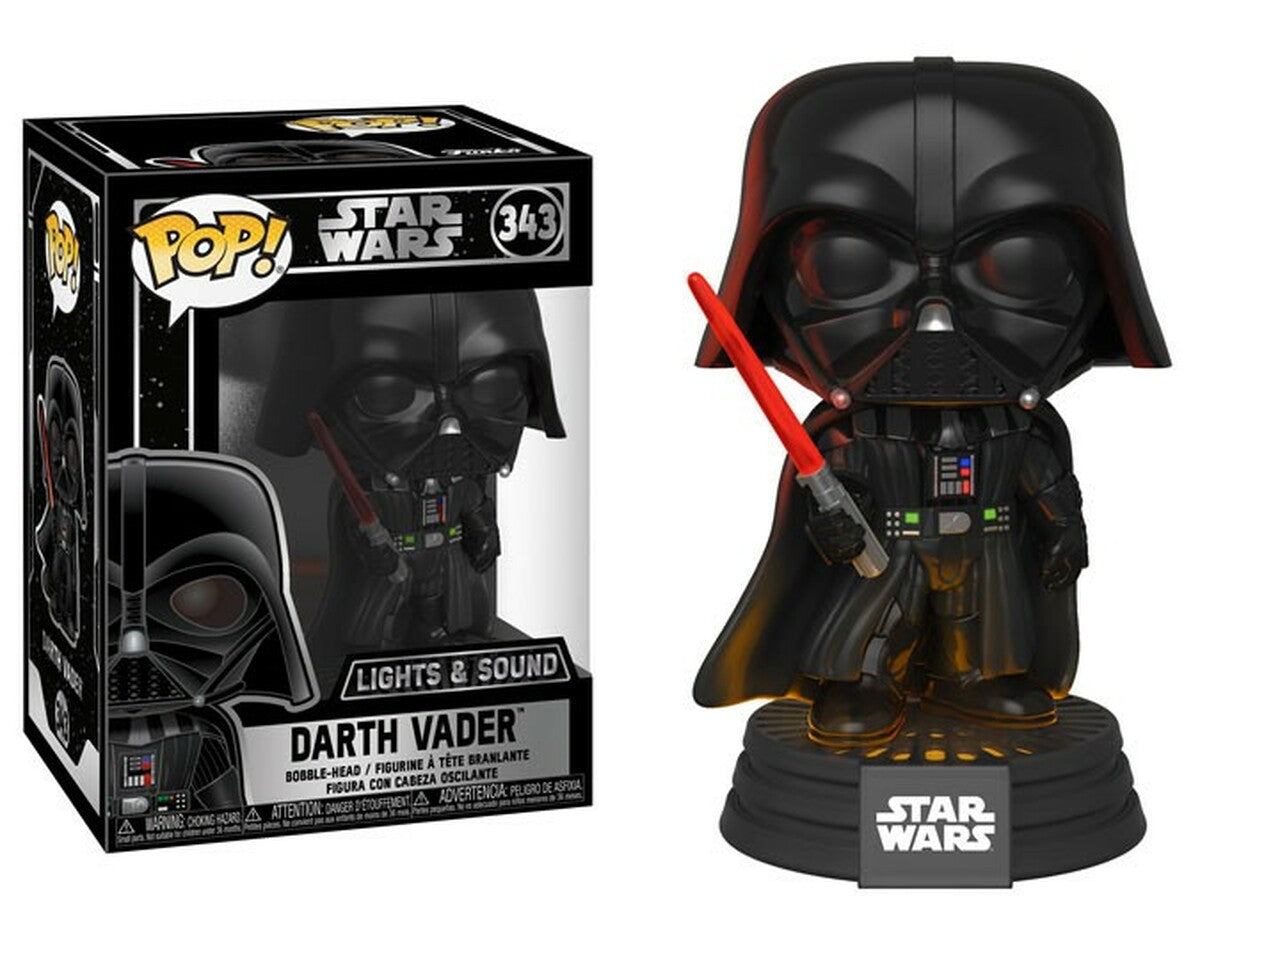 Funko Pop! Star Wars - Darth Vader Figure with Light and Sound #343